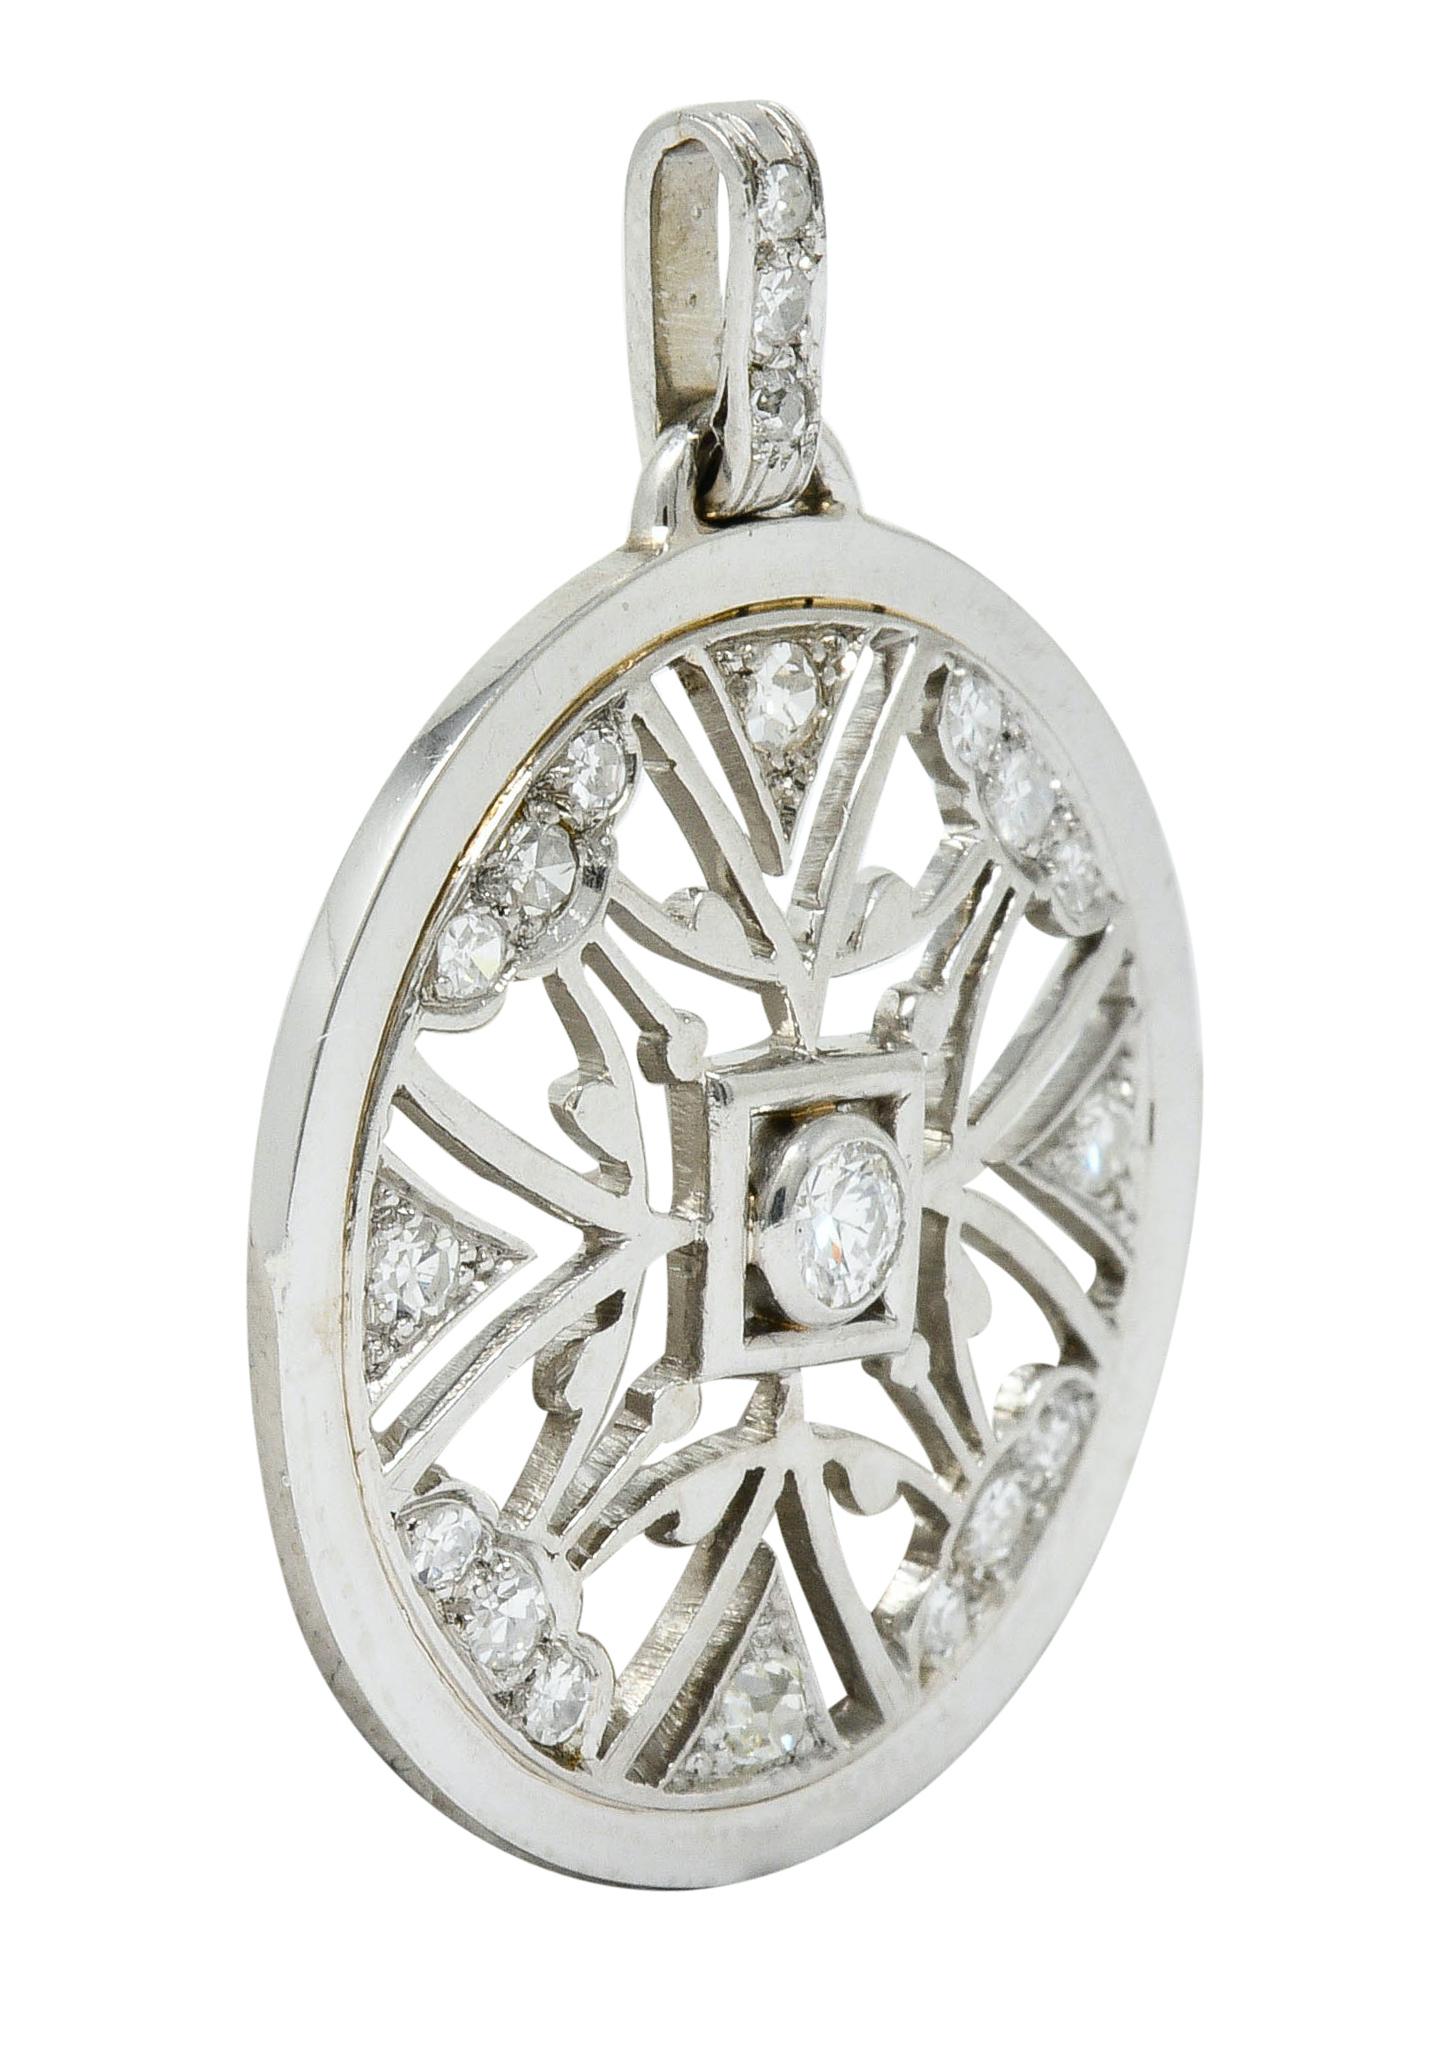 Circular pendant is pierced with a symmetrical geometric motif

Centering a round brilliant cut diamond weighing approximately 0.11 carat; I color with VS clarity

Surrounded by single and old European cut diamonds weighing in total approximately